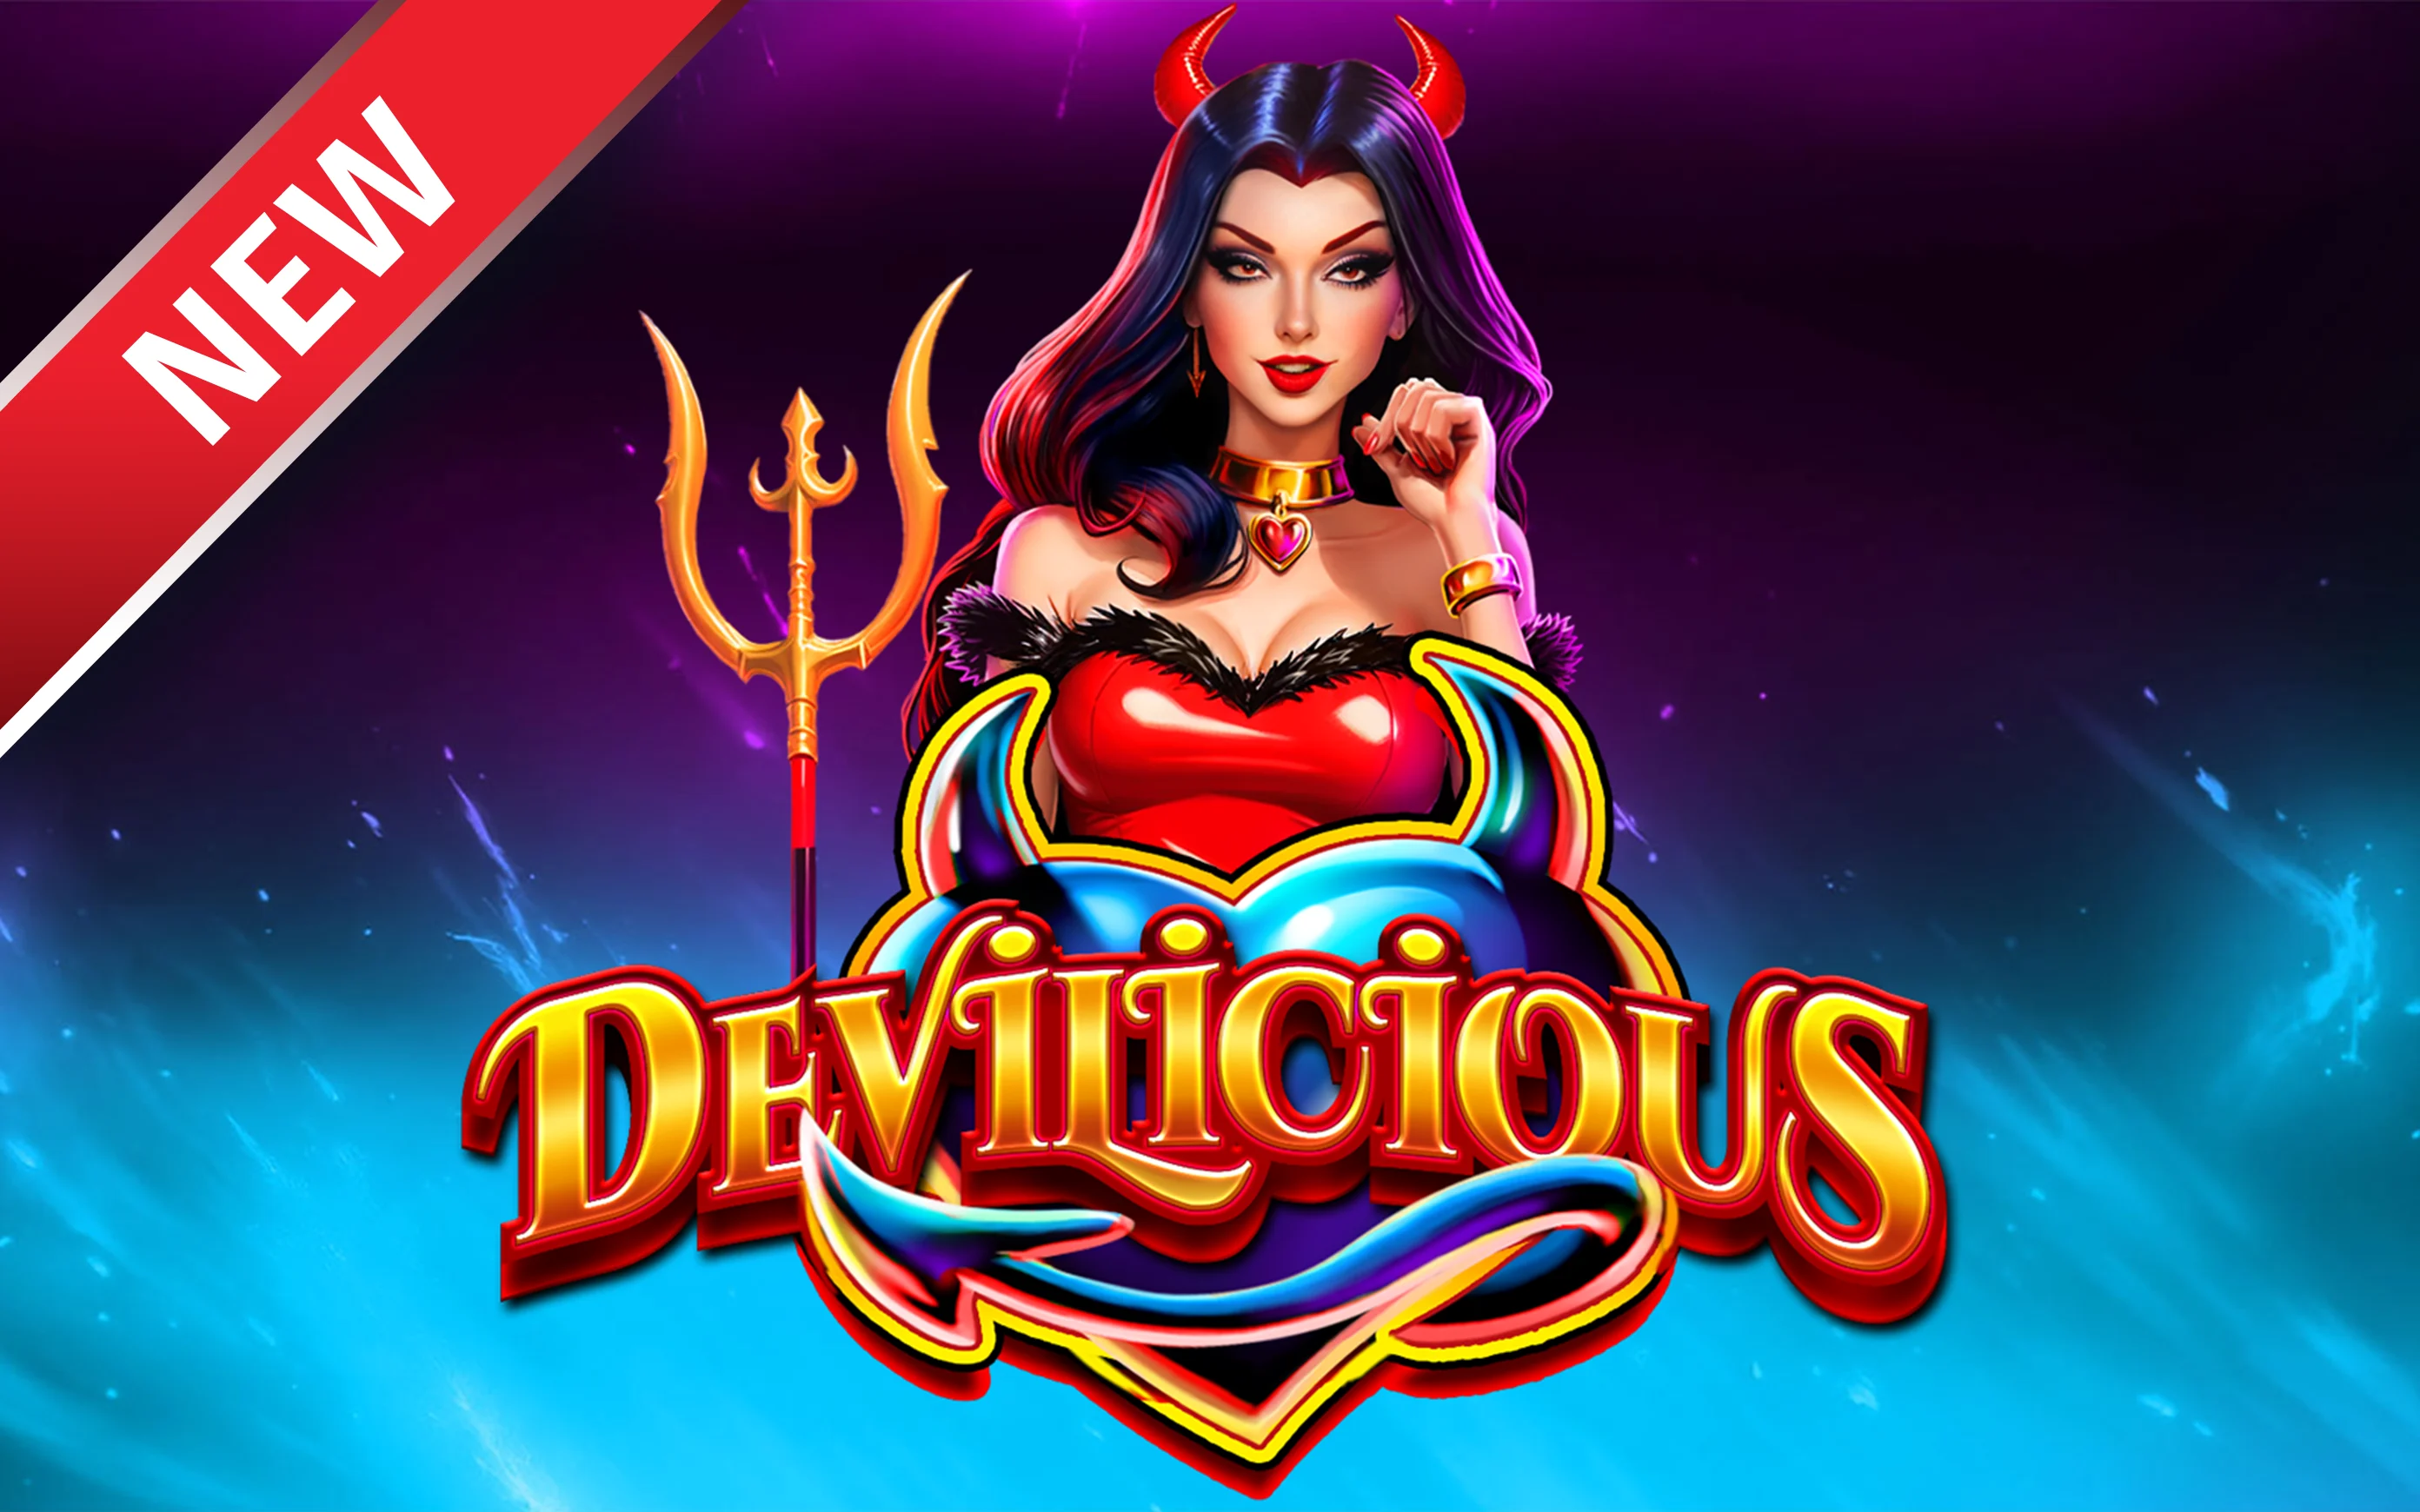 Play Devilicious on Starcasino.be online casino